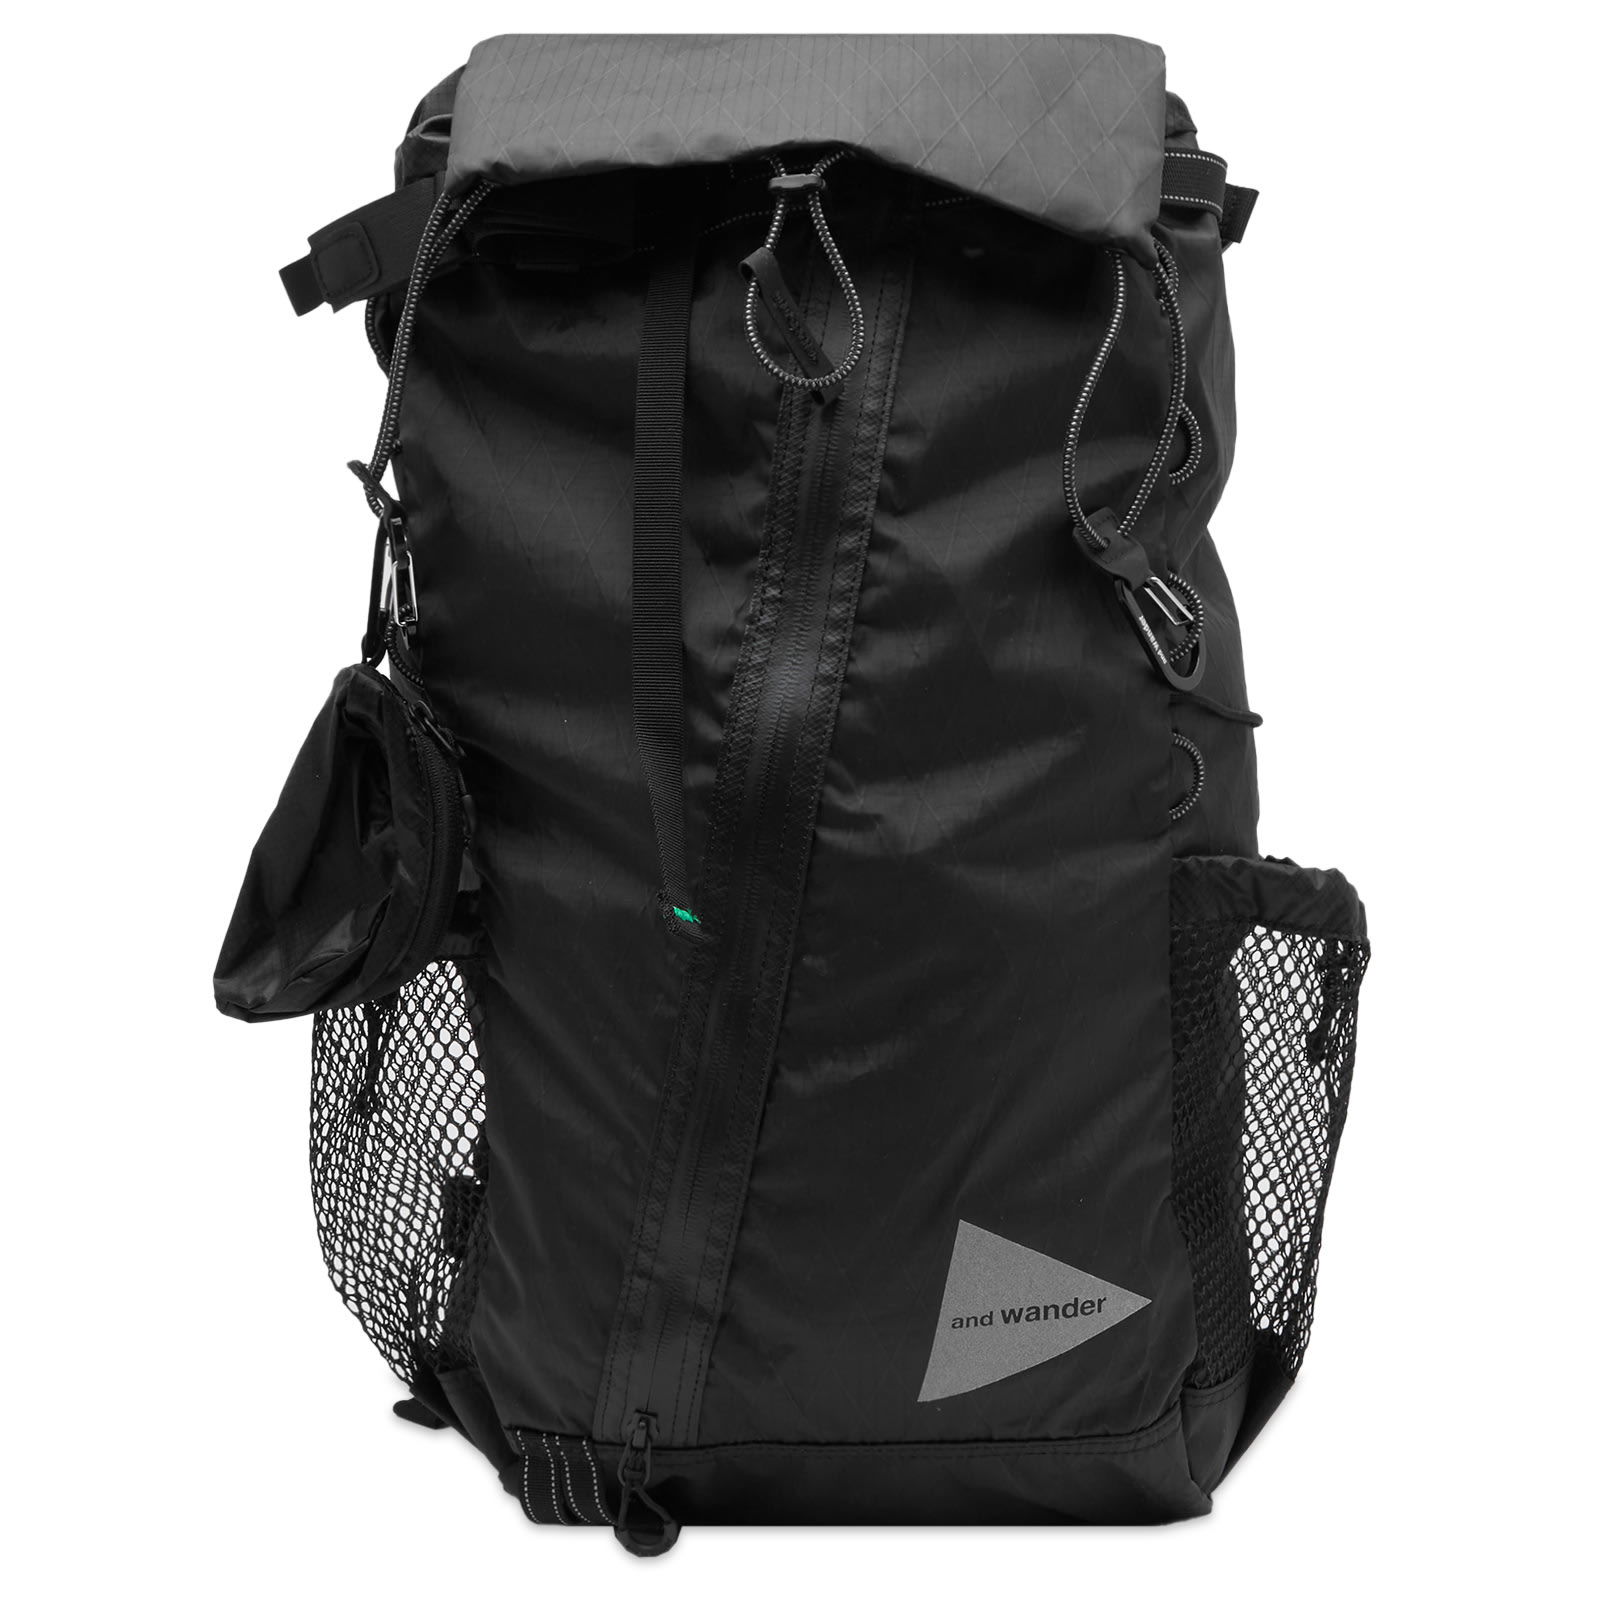 Backpack and wander X-Pac 30L Backpack 5743975089-010 | FlexDog